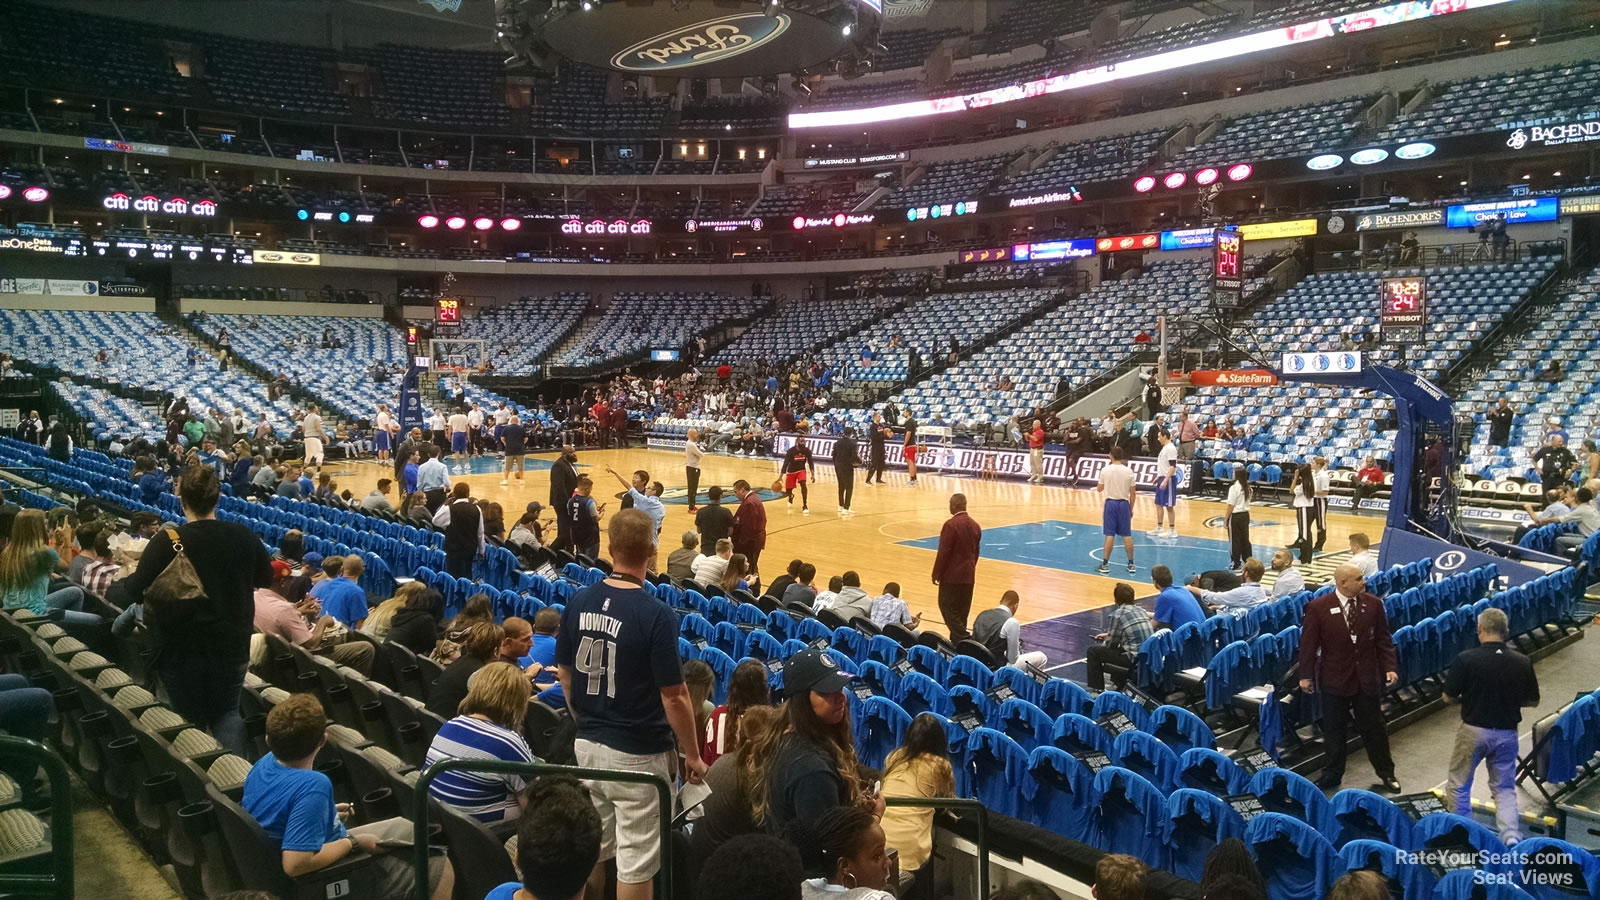 Section 104 at American Airlines Center RateYourSeats com